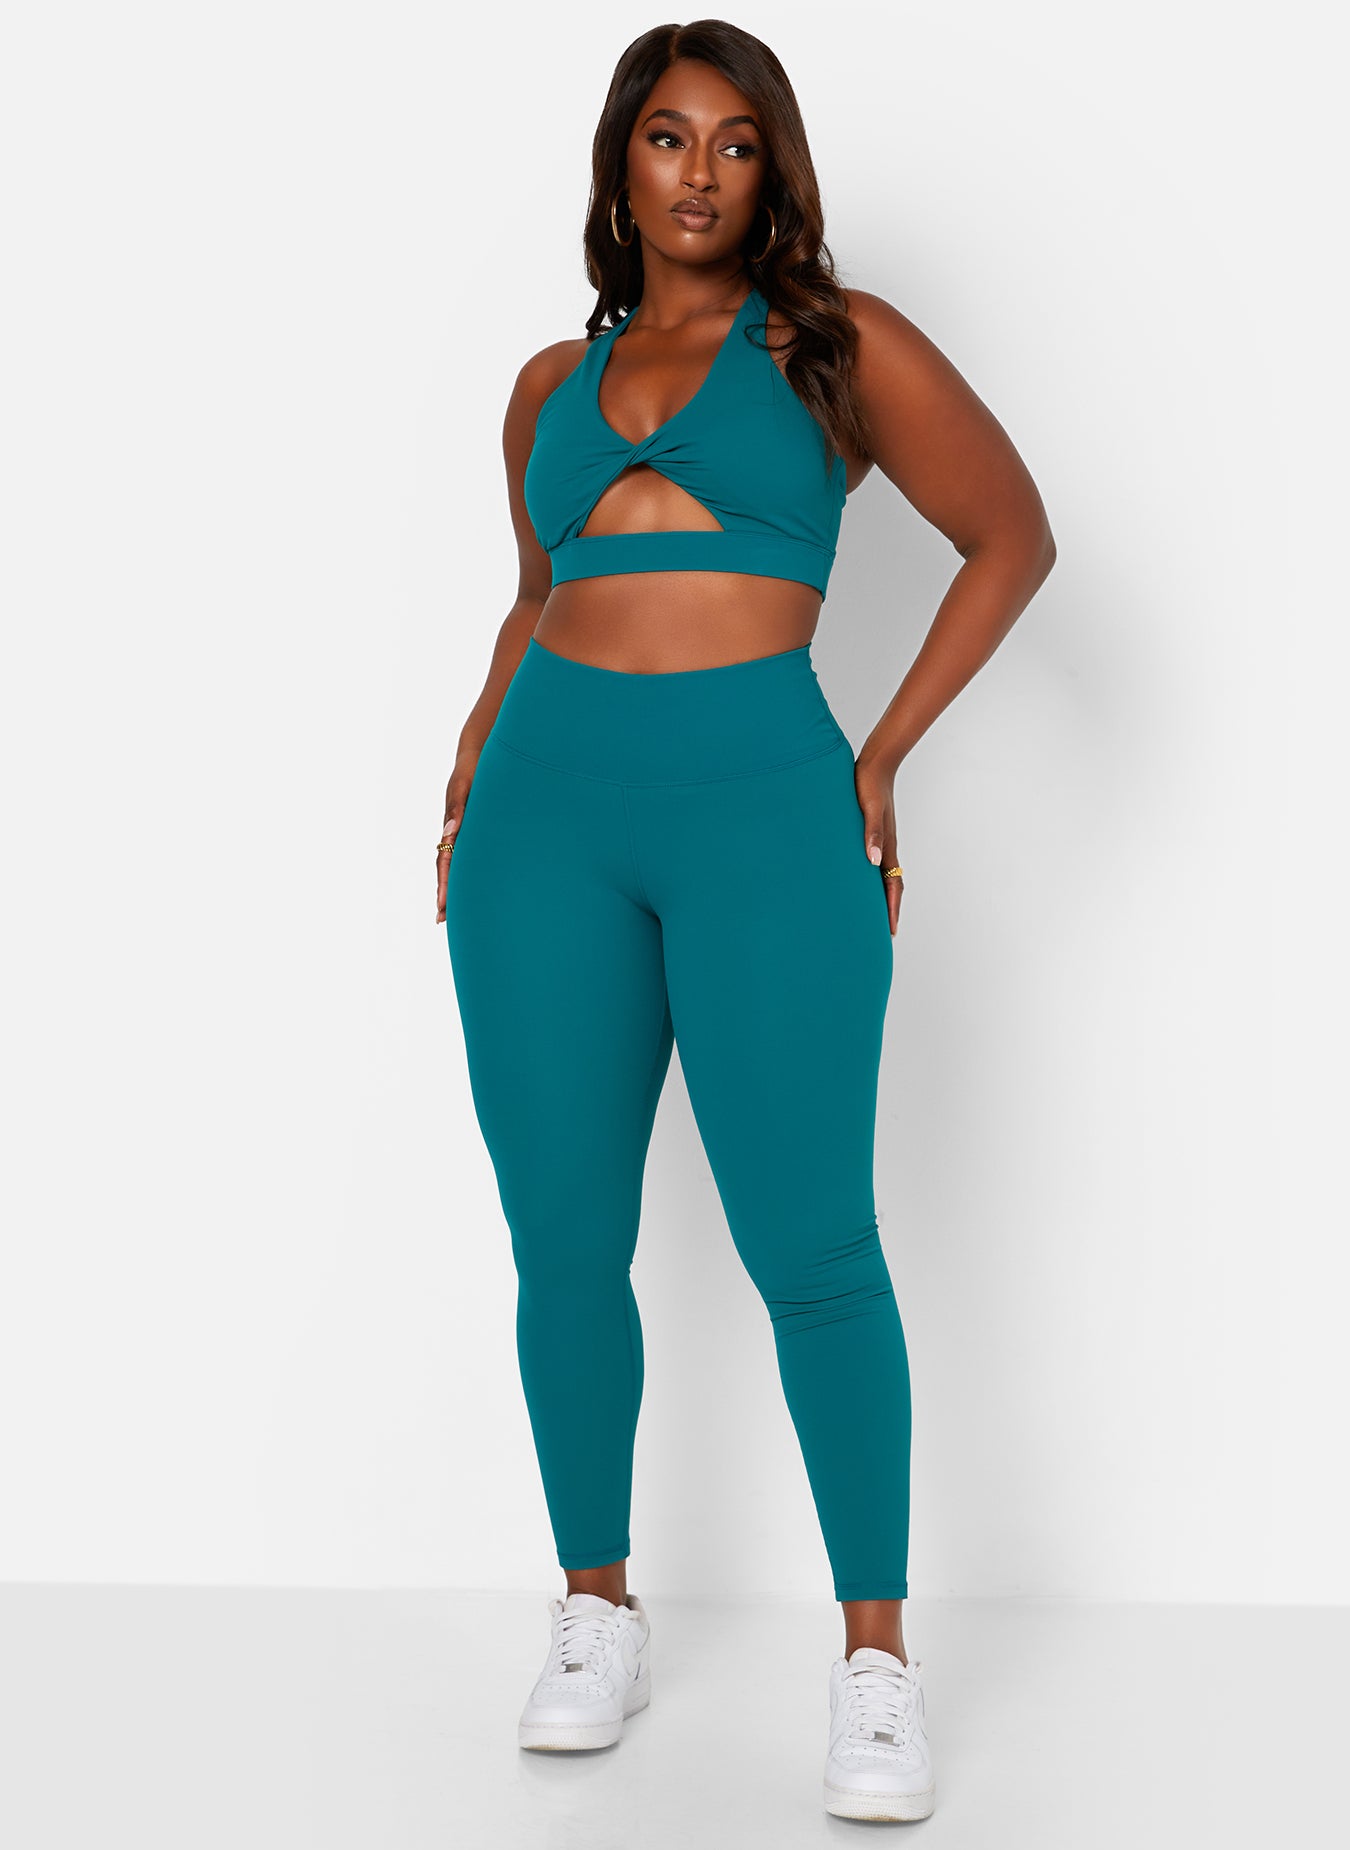 Teal In Motion Classic High Waist Sports Leggings Plus Sizes